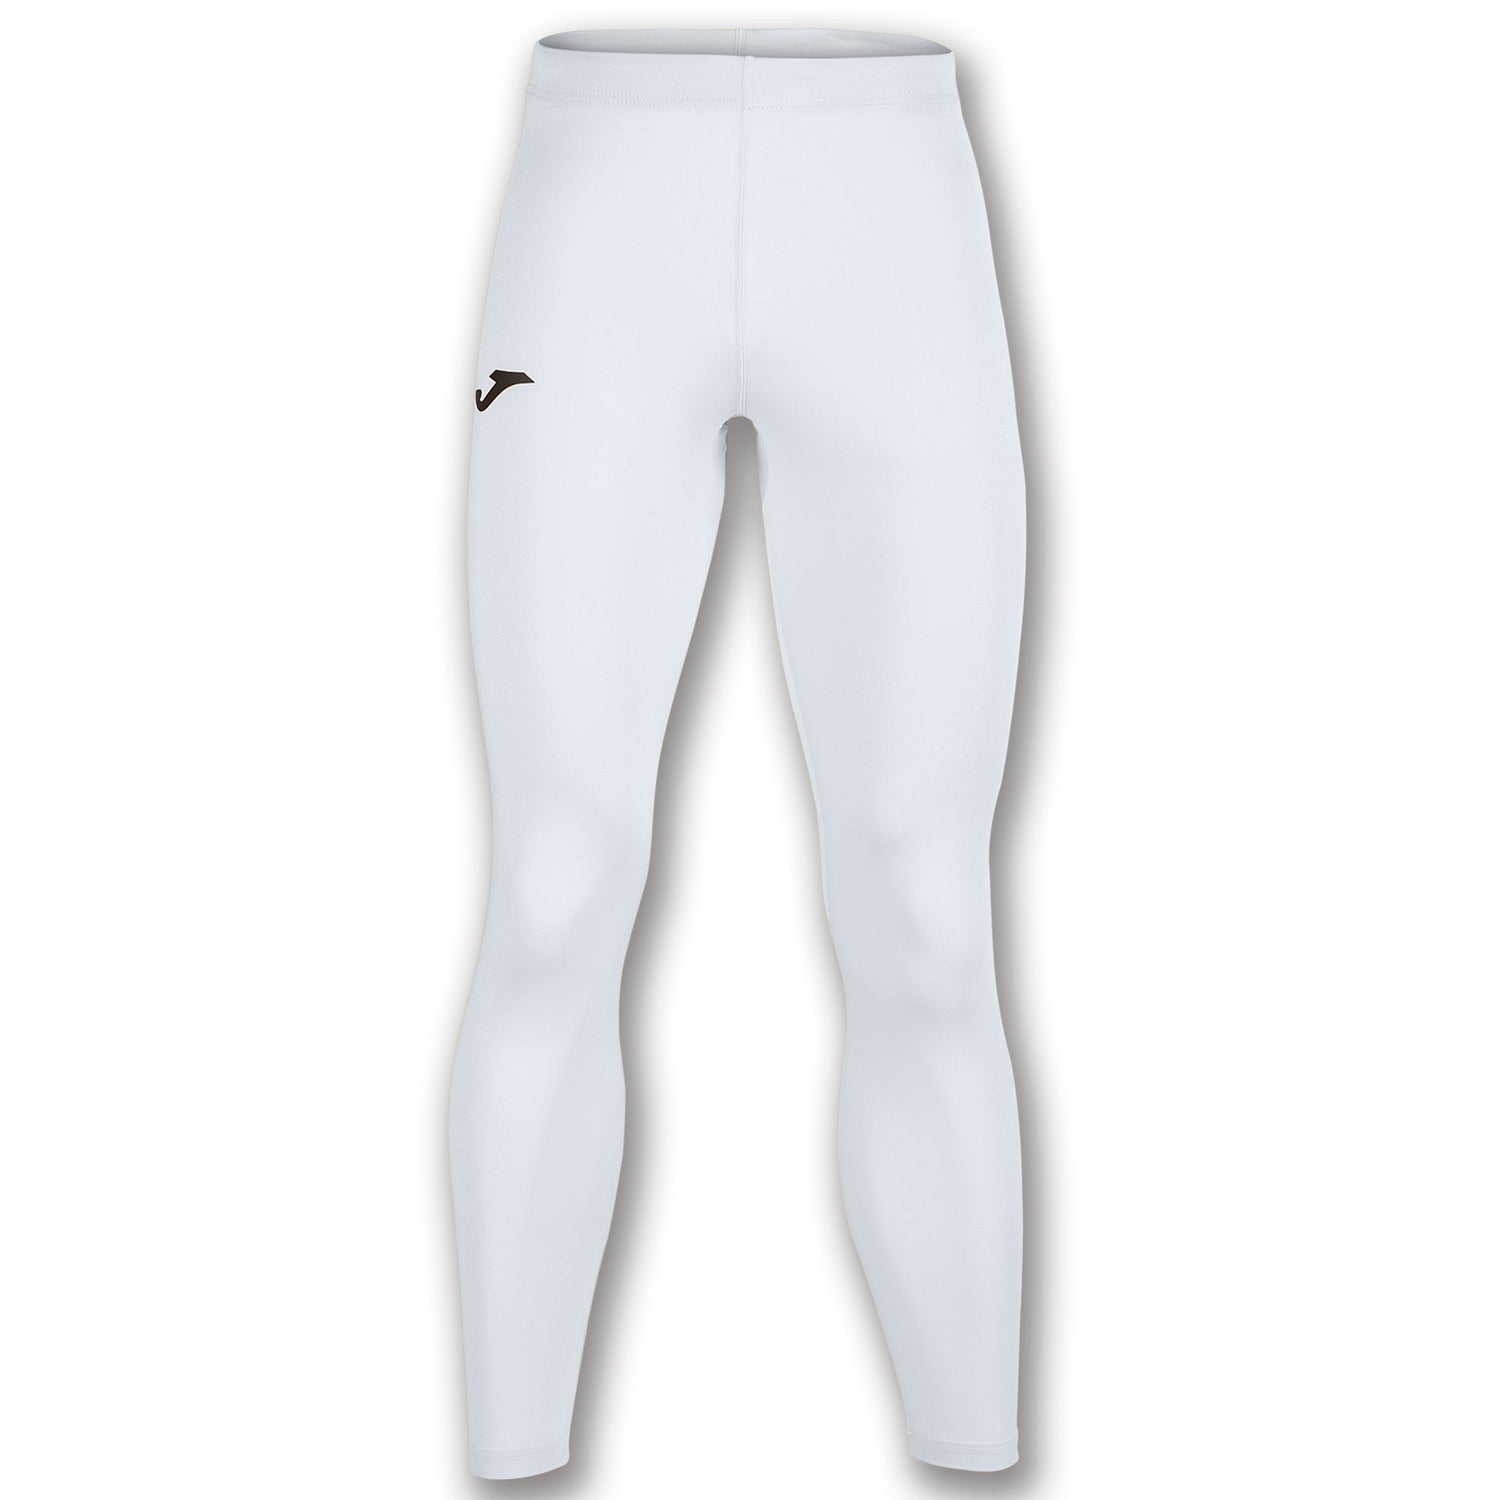 Joma Brama Baselayer Long Pant, available in Joma Canada Store. Joma is shipping in Canada. For club offers contact us.